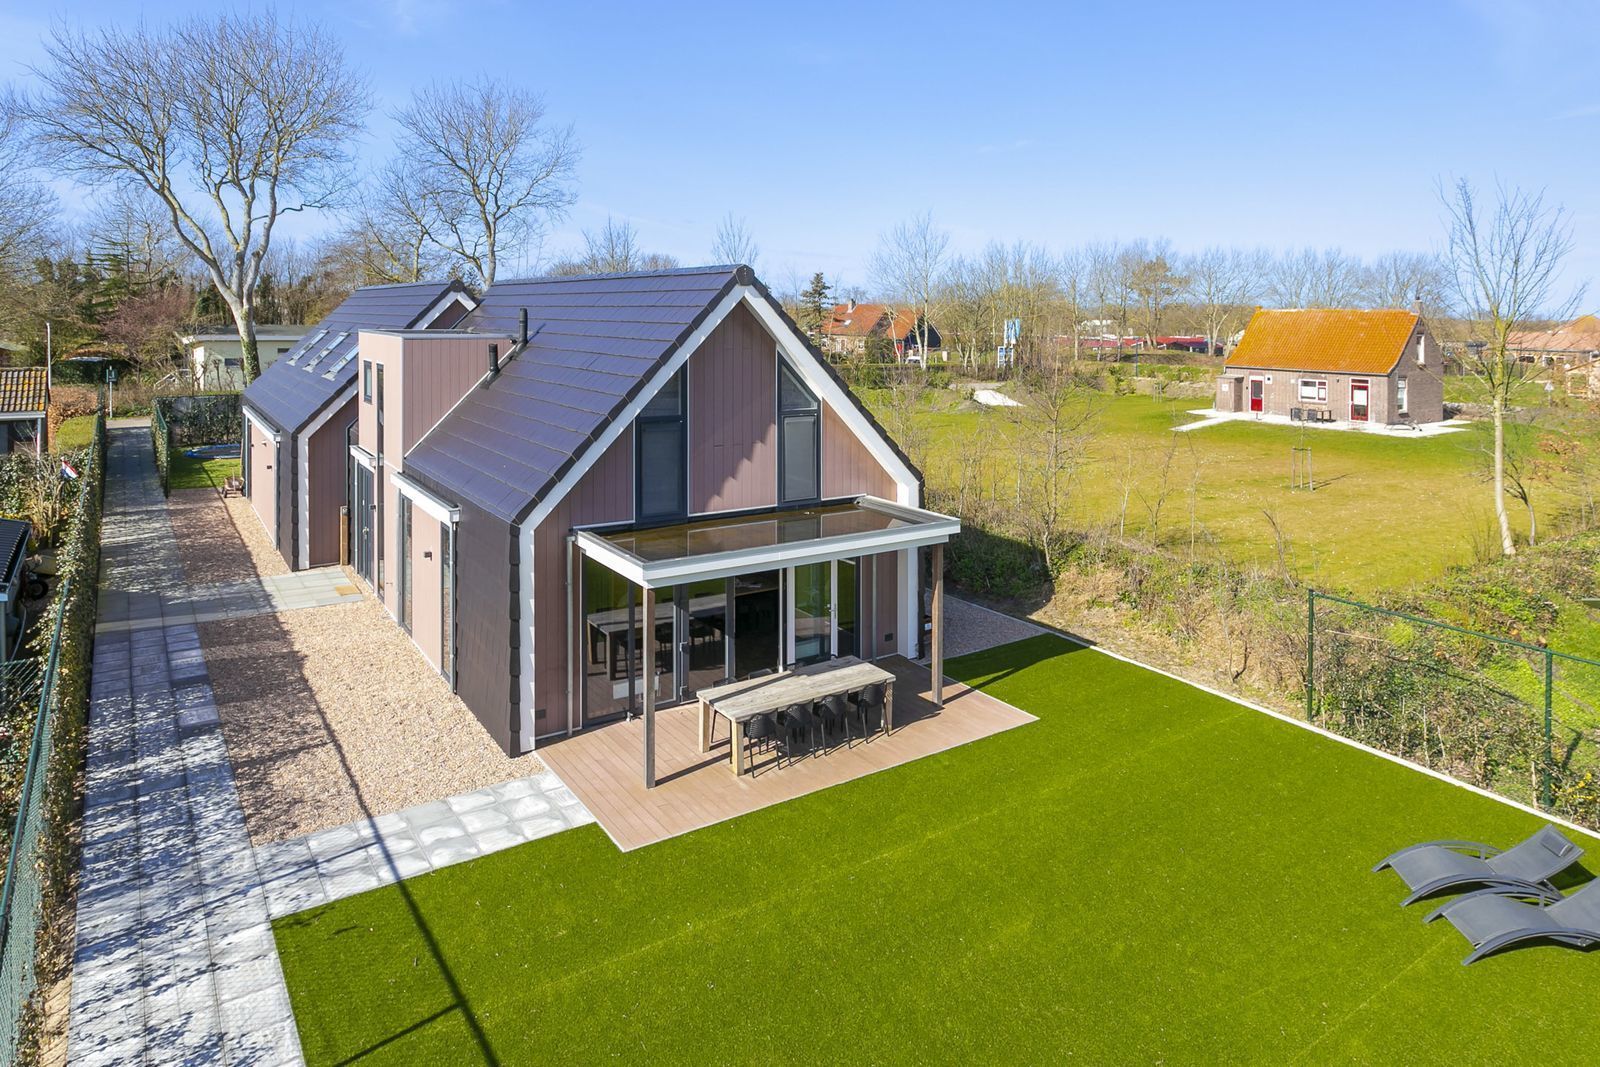 Oude Nieuwlandseweg 33 - Ouddorp - Villa Mastlo (with jacuzzi, extra costs for use)